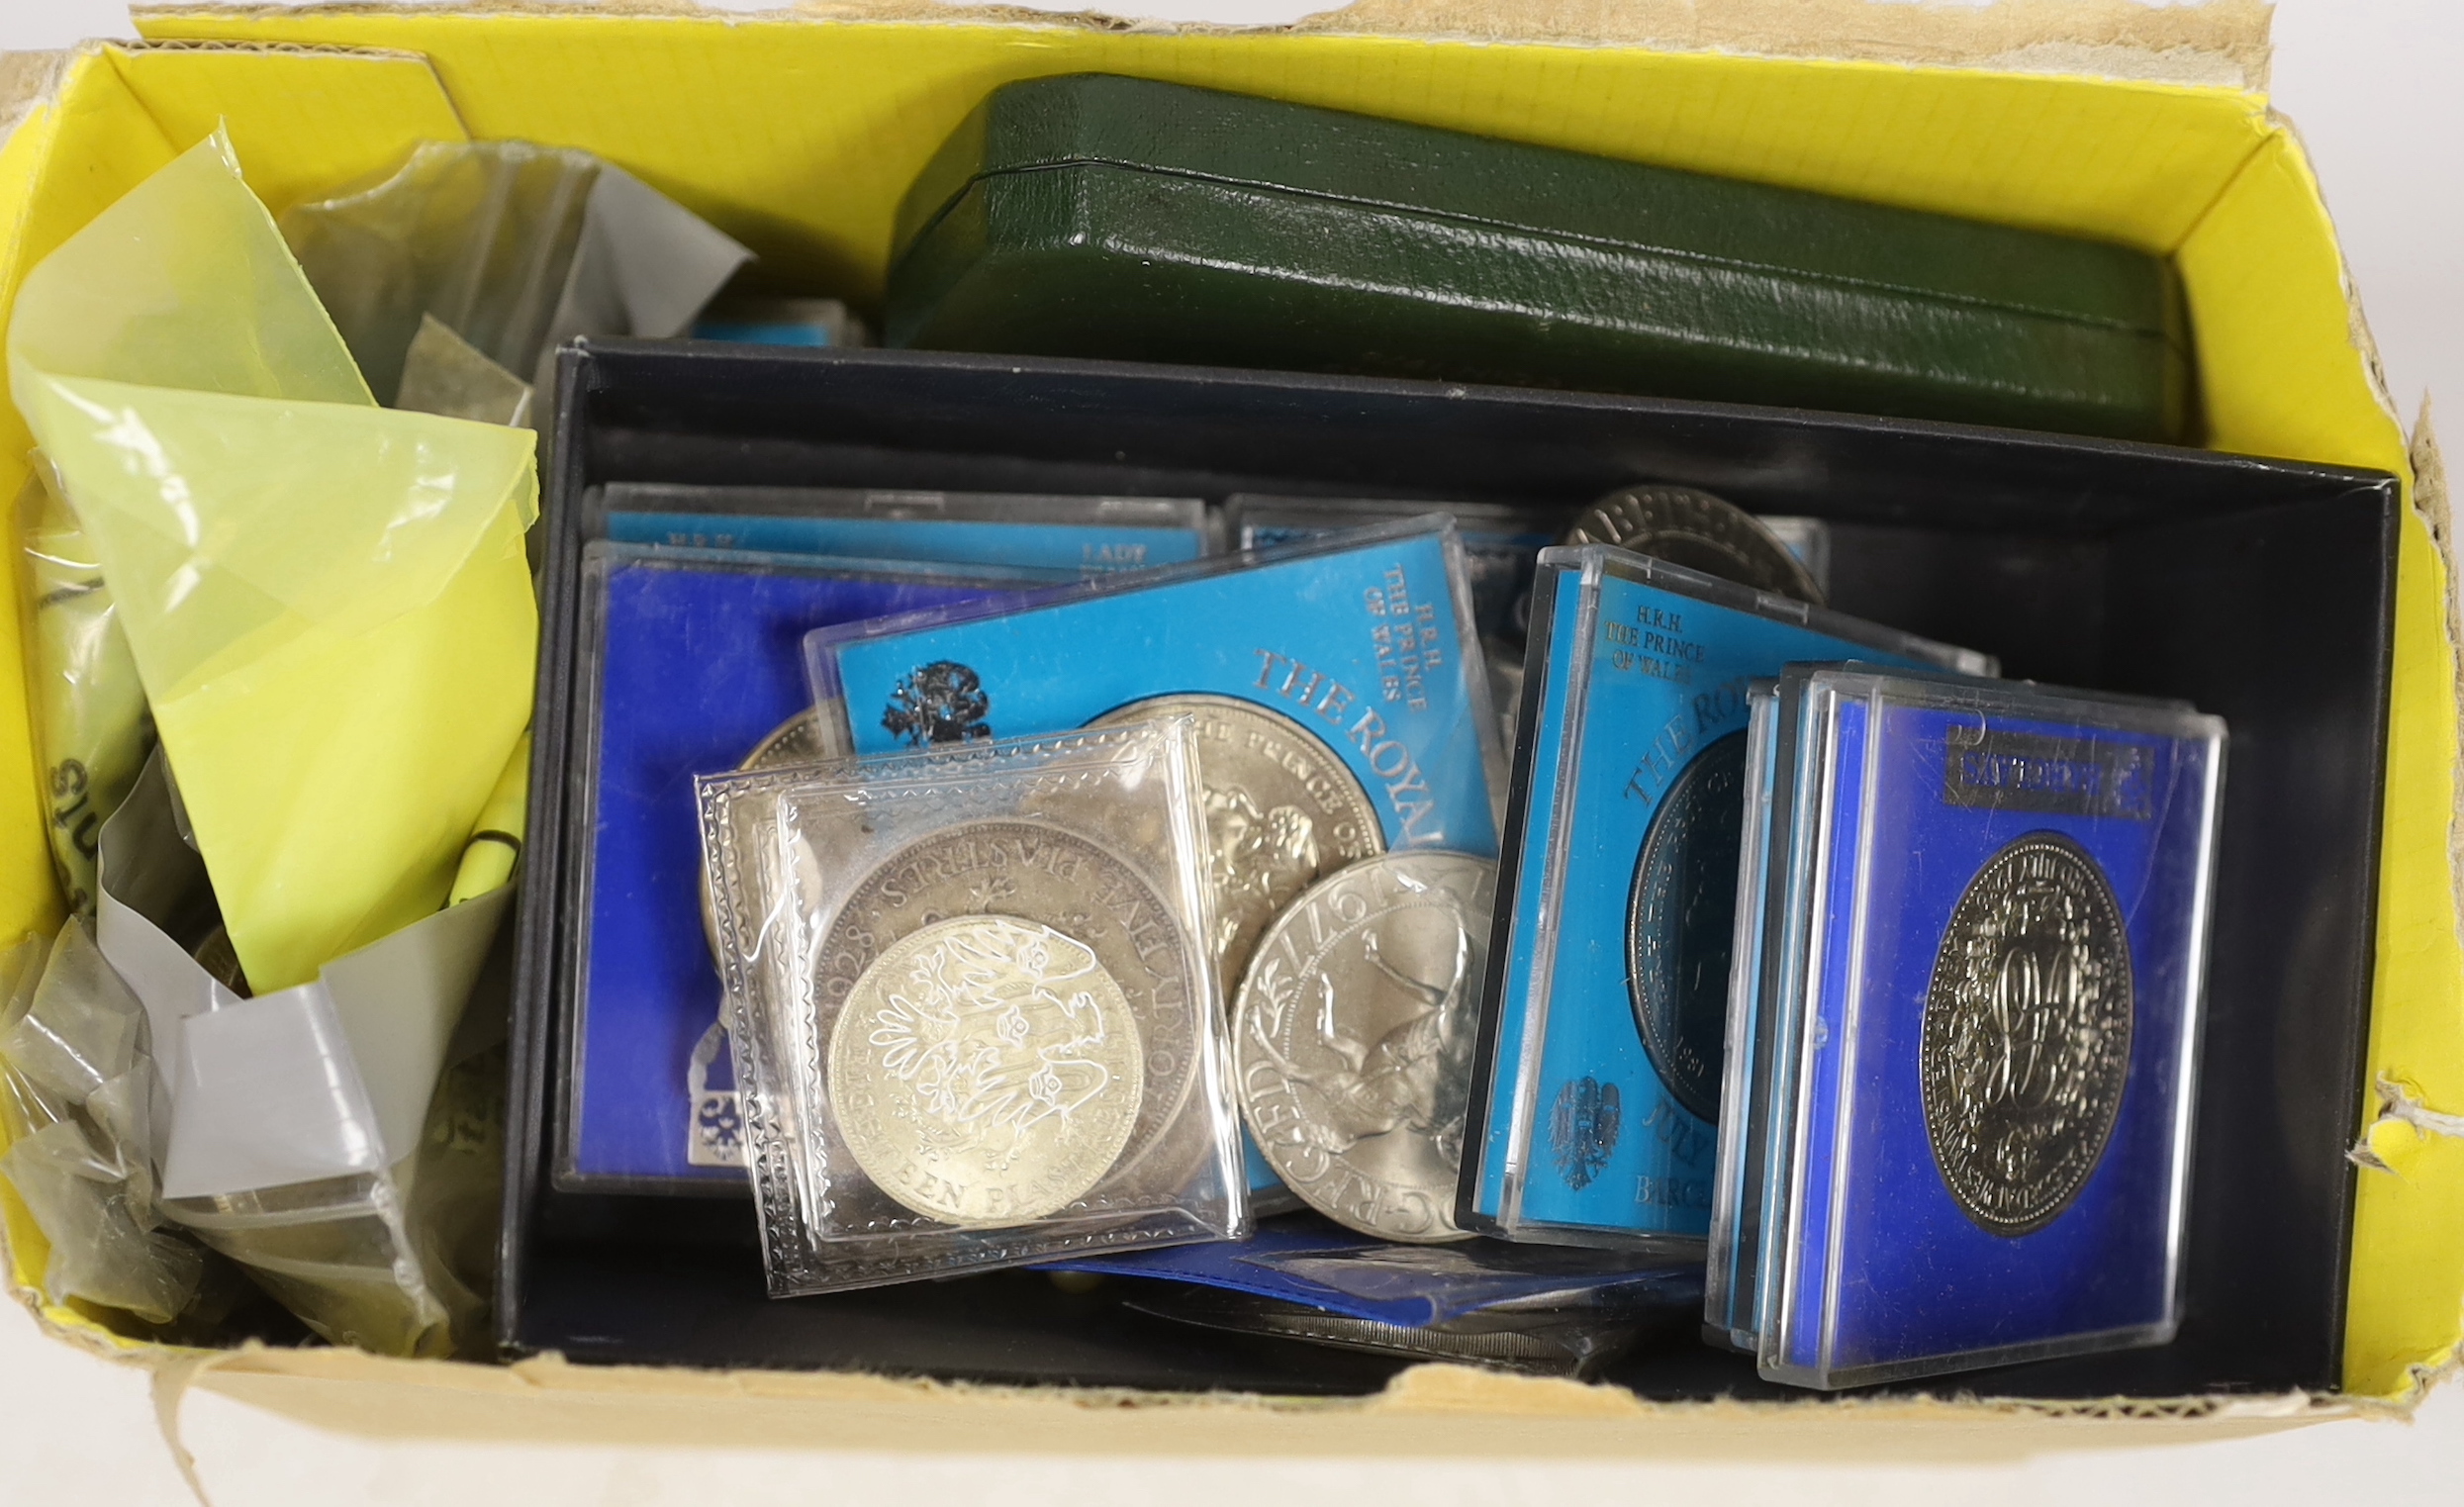 British and world coins, including Cyprus forty five piastres 1928, about EF, Cyprus silver proof £1 and 500 mils coins, 1976, UK commemorative coins and medals, US, Greece, etc..